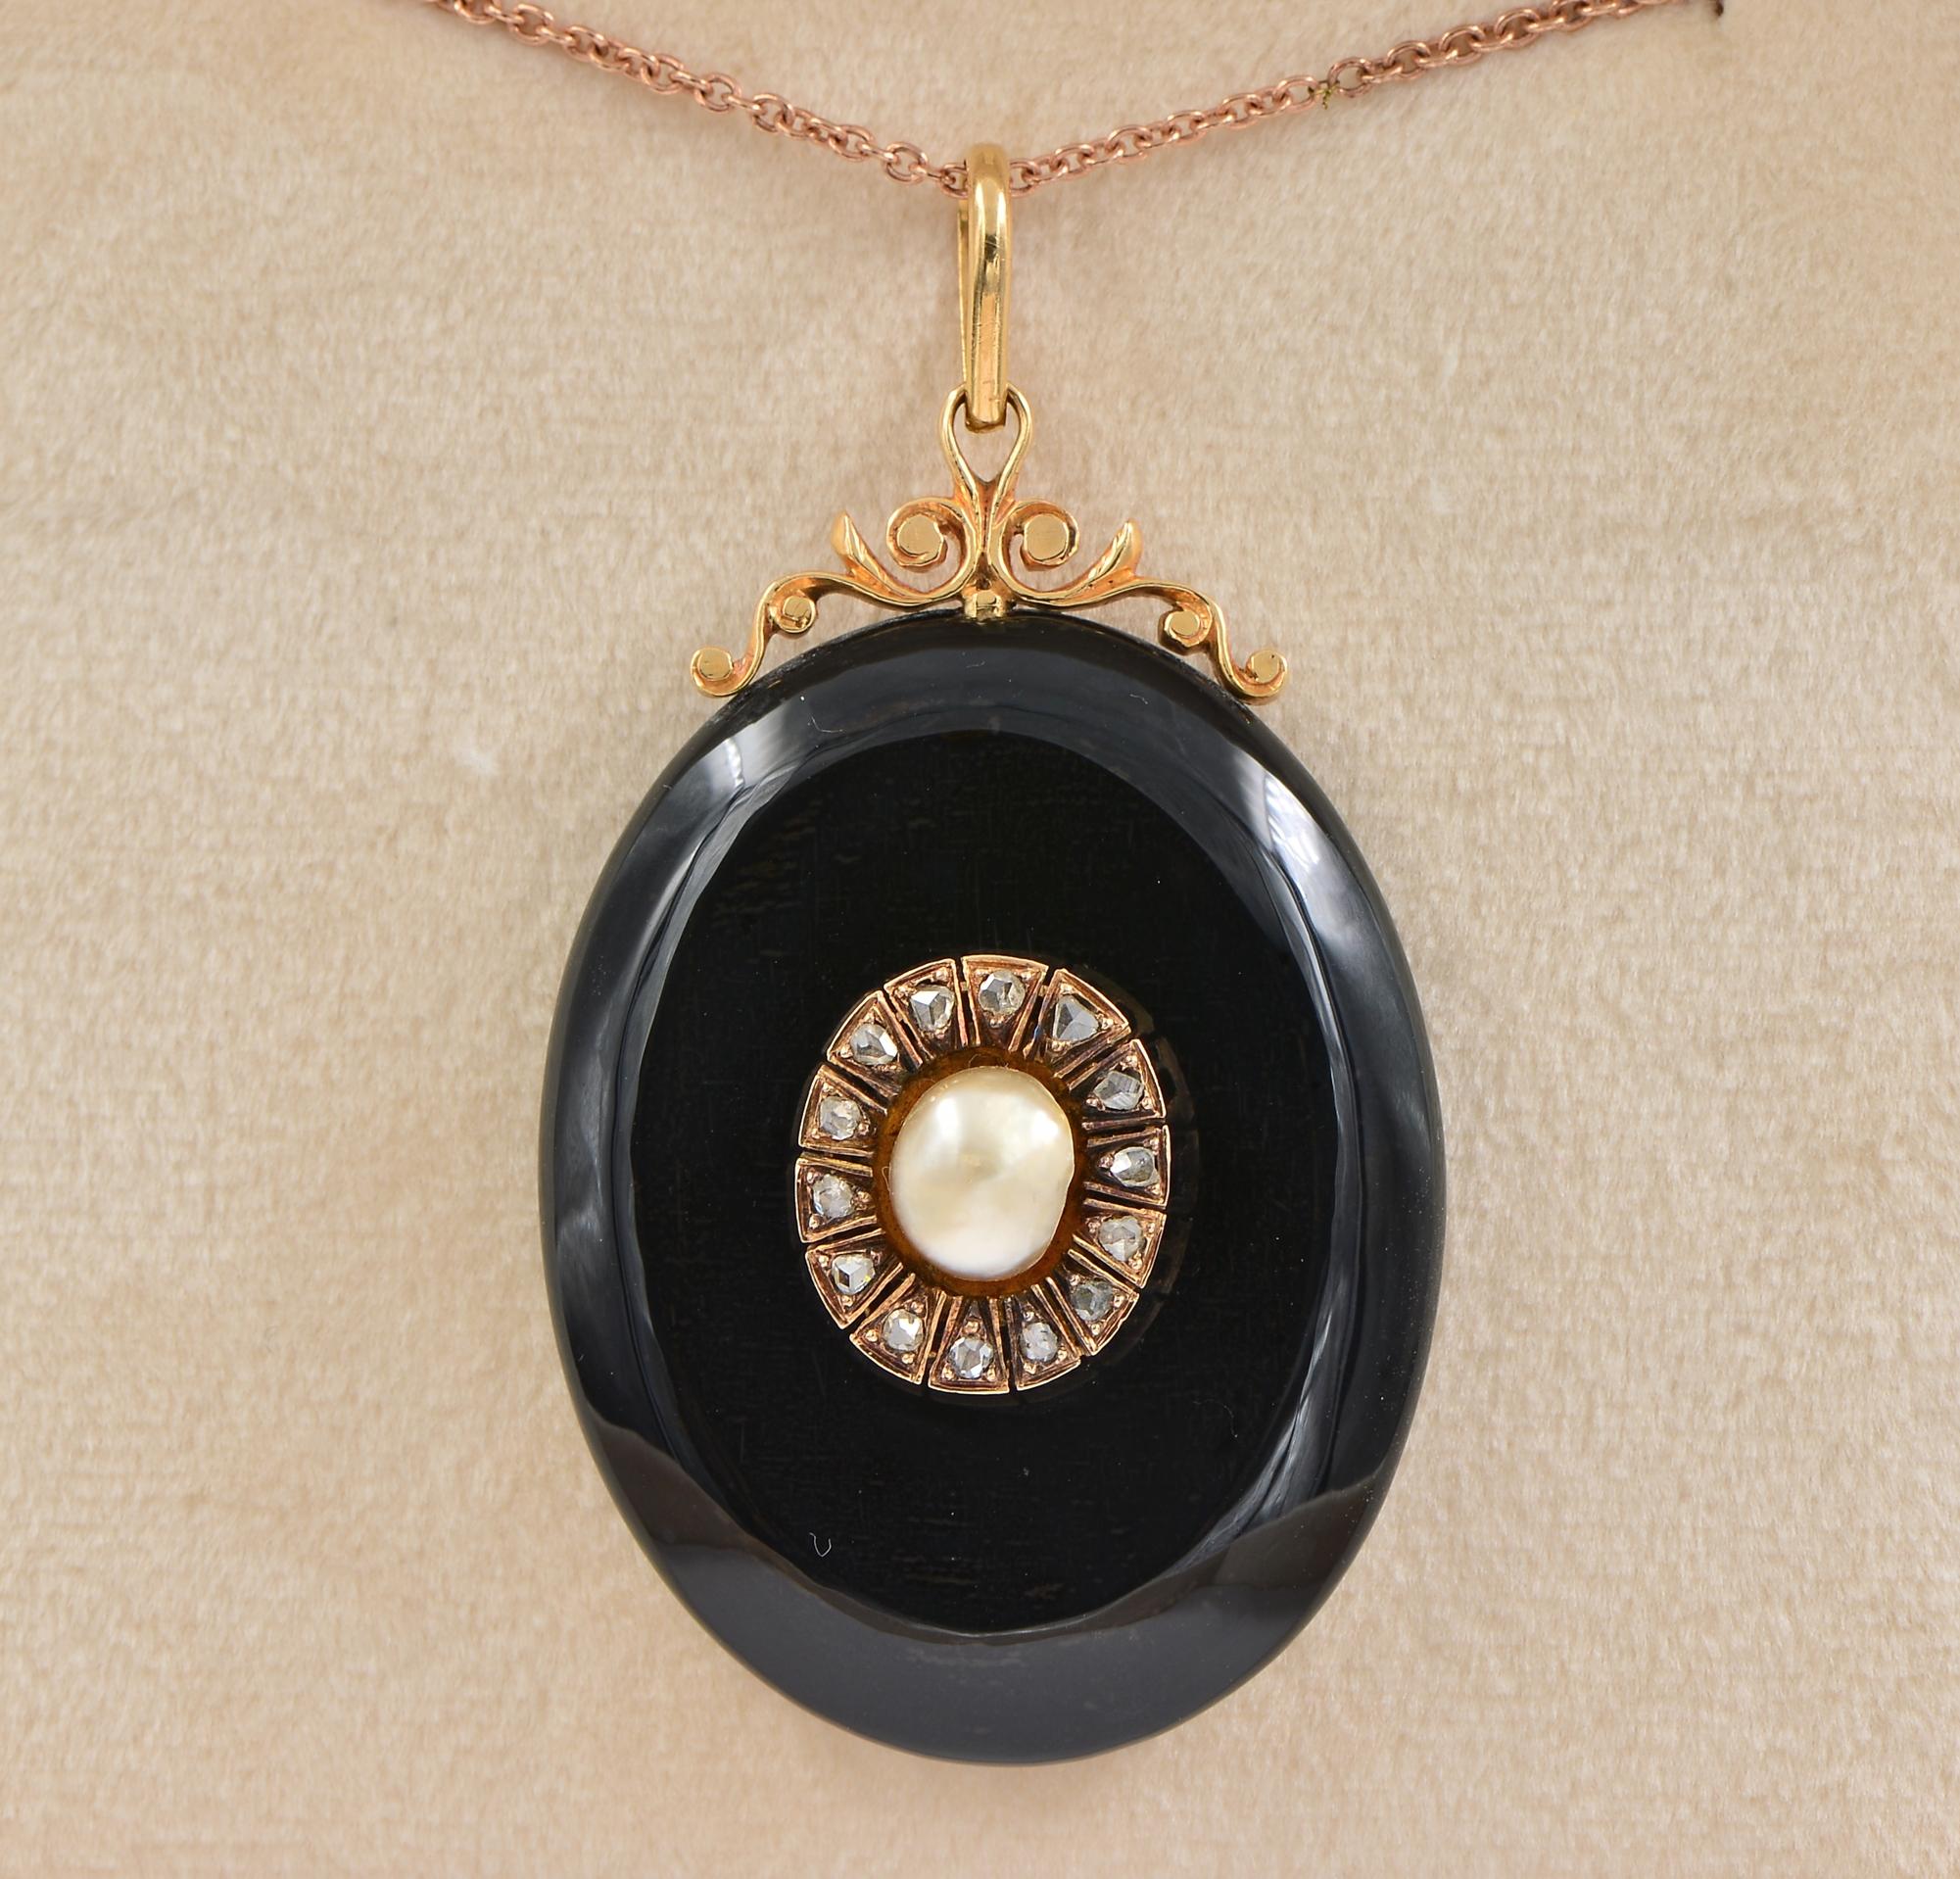 Memories Keeper
Superb Victorian period 1880 ca, large carved Onyx locket pendant with scroll open work at the top side further embellished with centre – not nucleated Natural Sea Pearl – nestled into a halo of Rose cut Diamonds for a dramatic